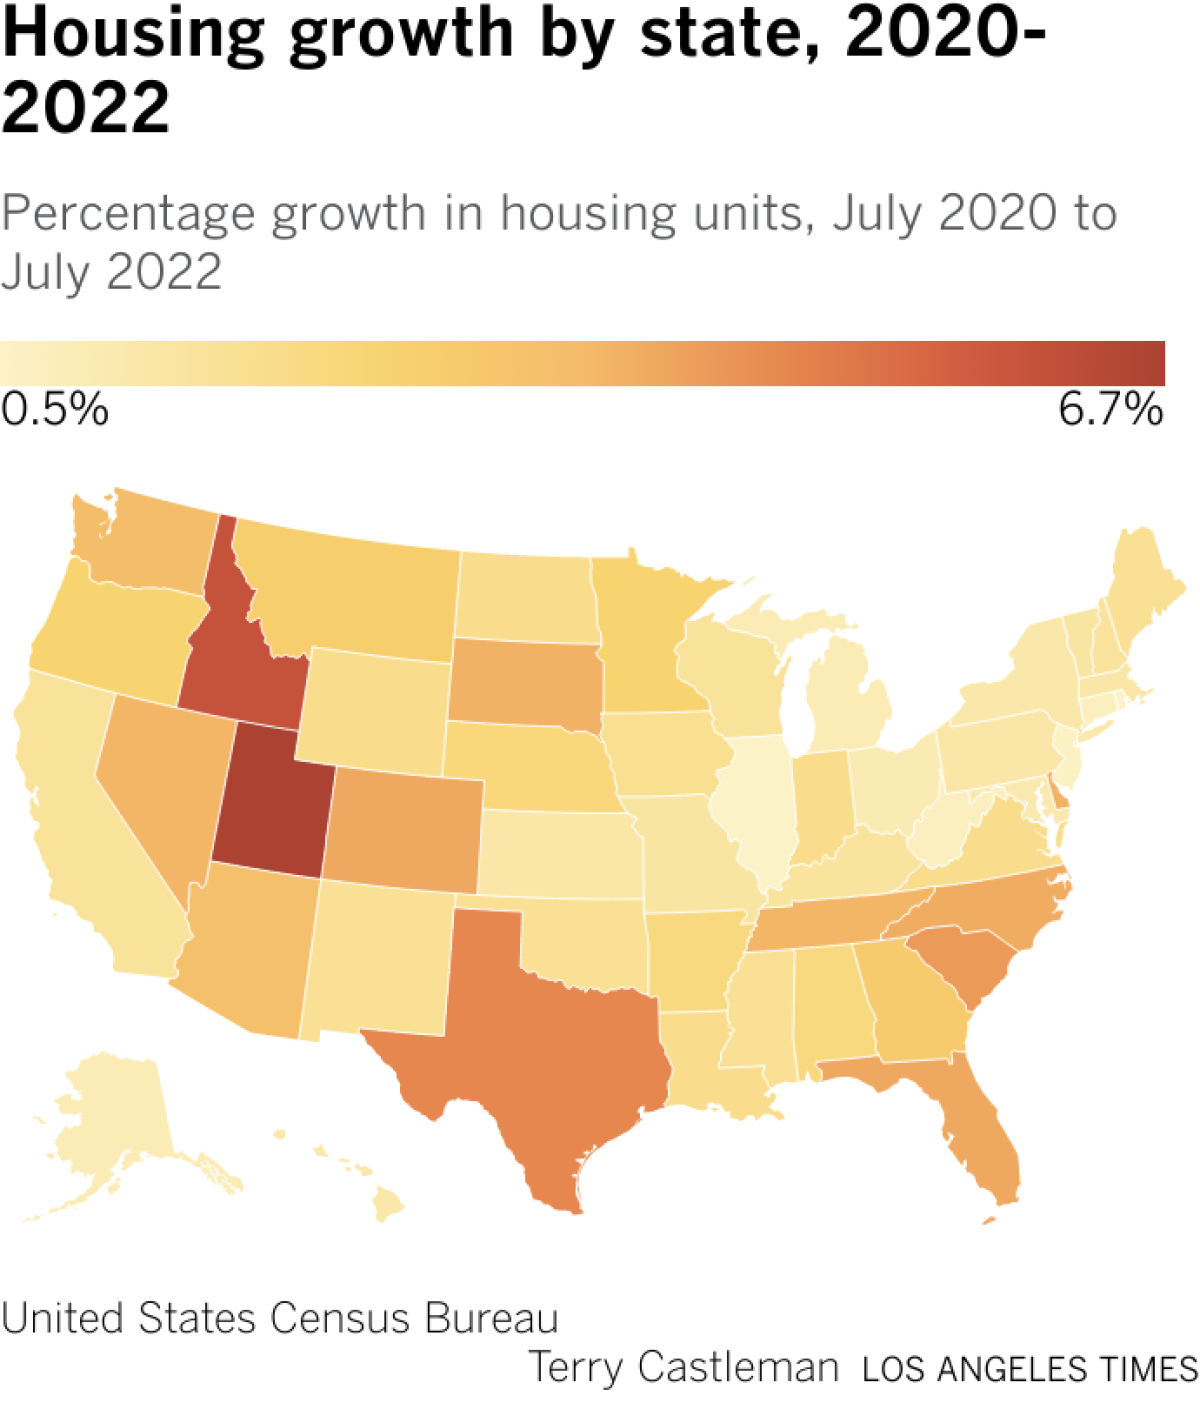 Percentage growth in housing units, July 2020 to July 2022